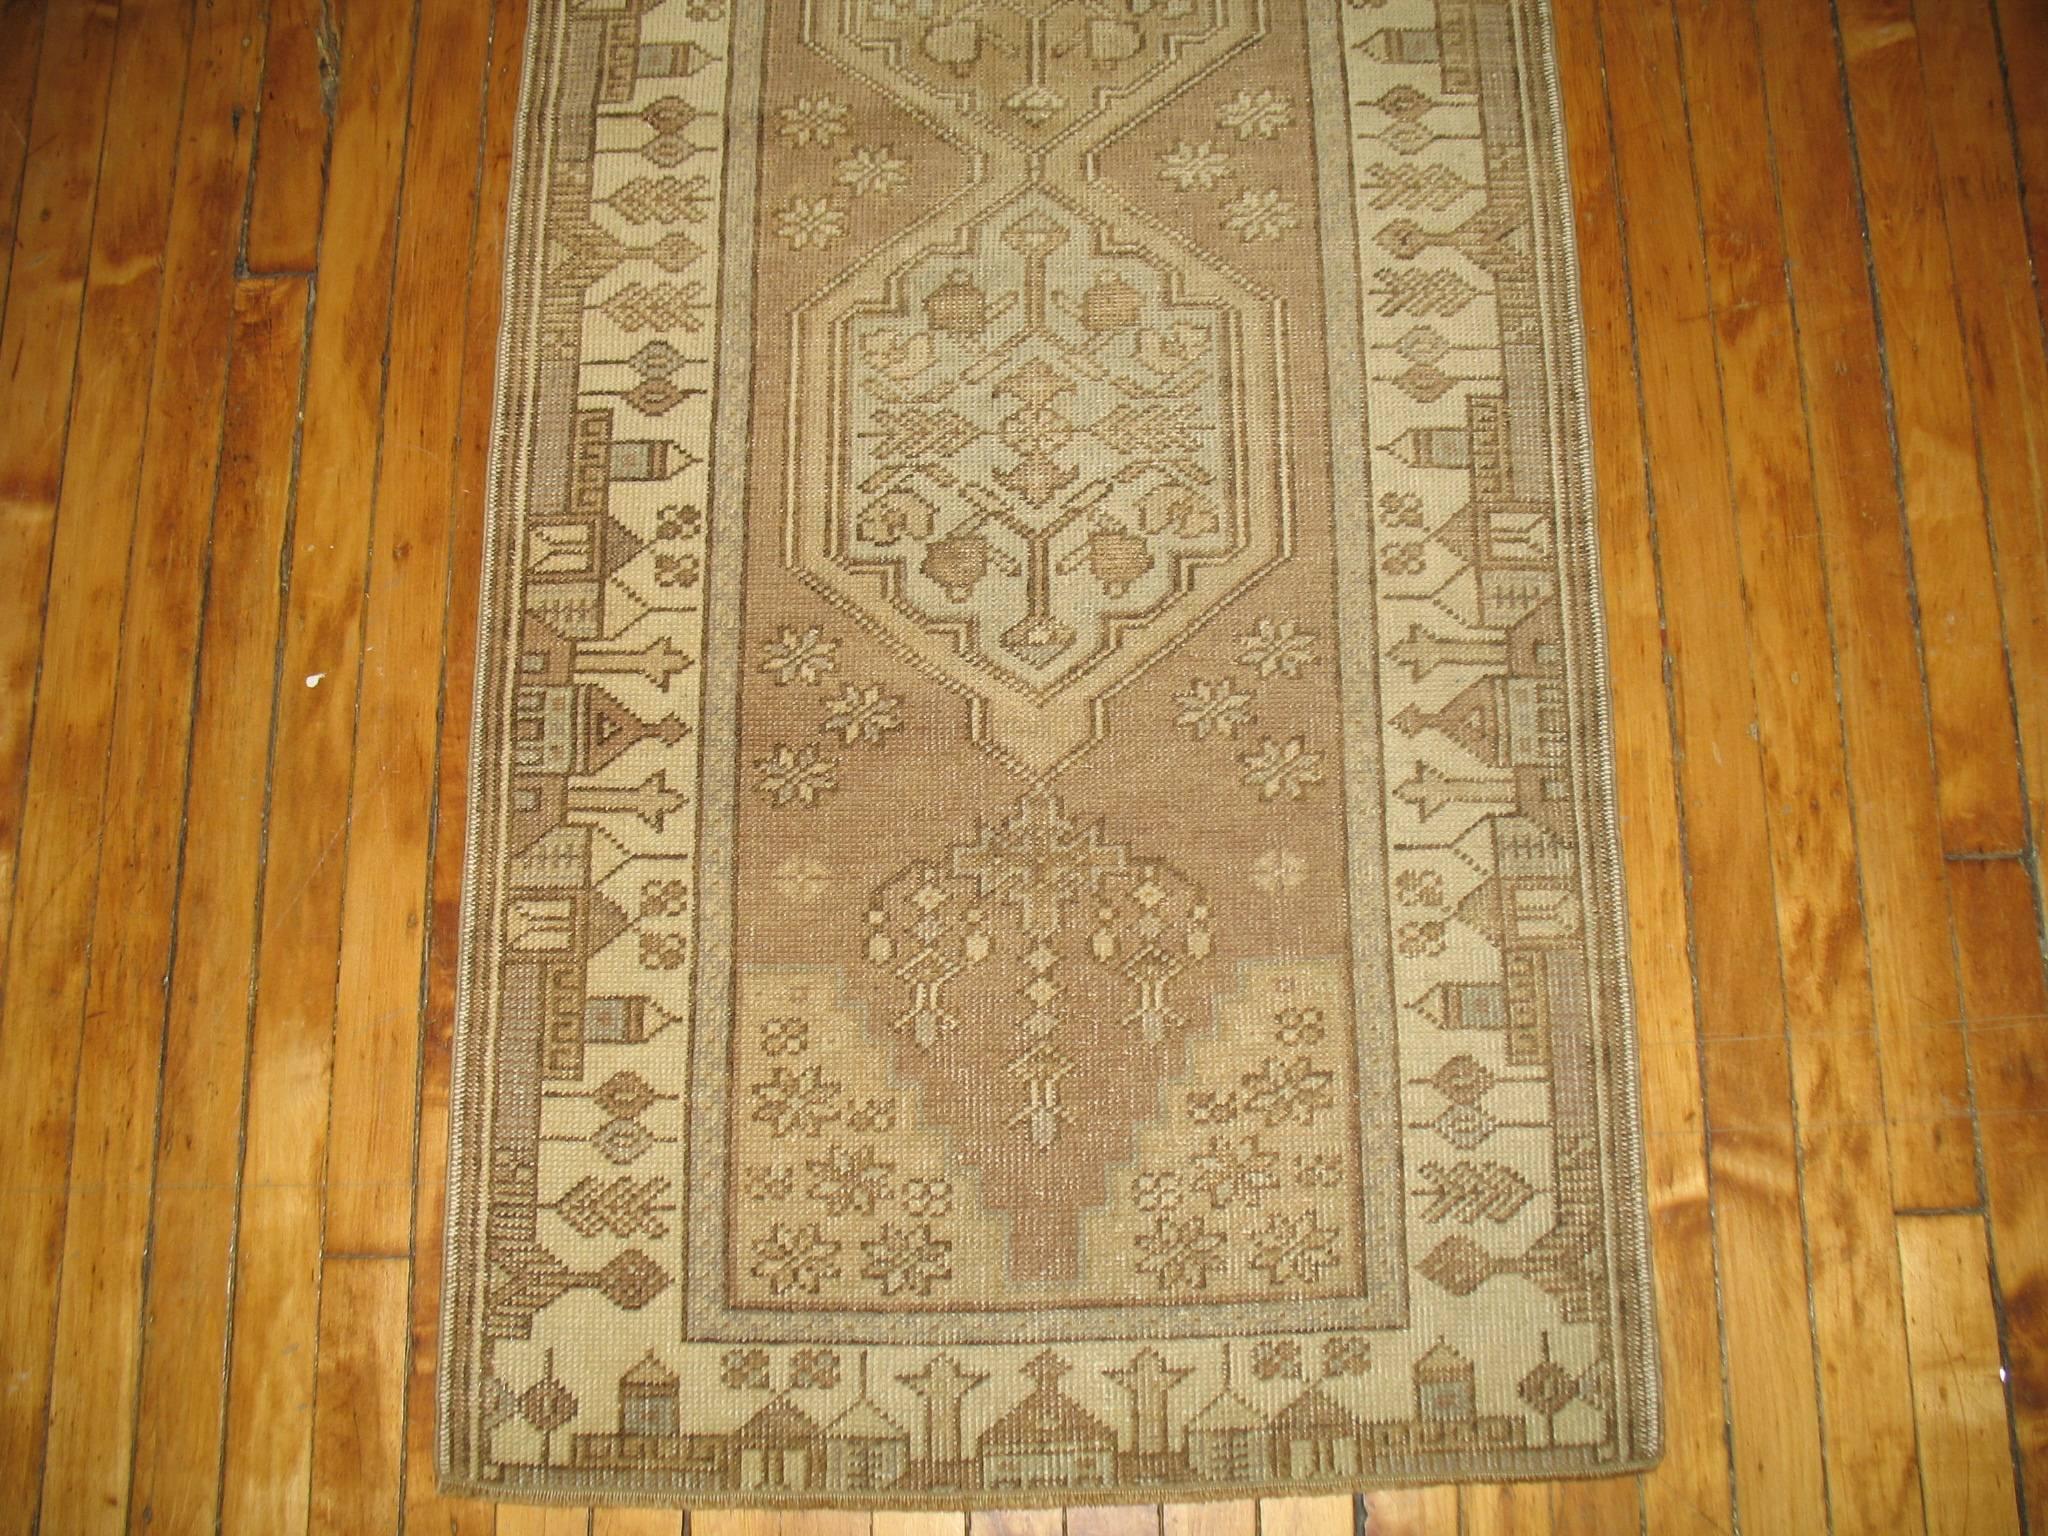 Midcentury Turkish runner. Brown field, with tan border consisting of scenic homes and buildings.

Measures: 2'5